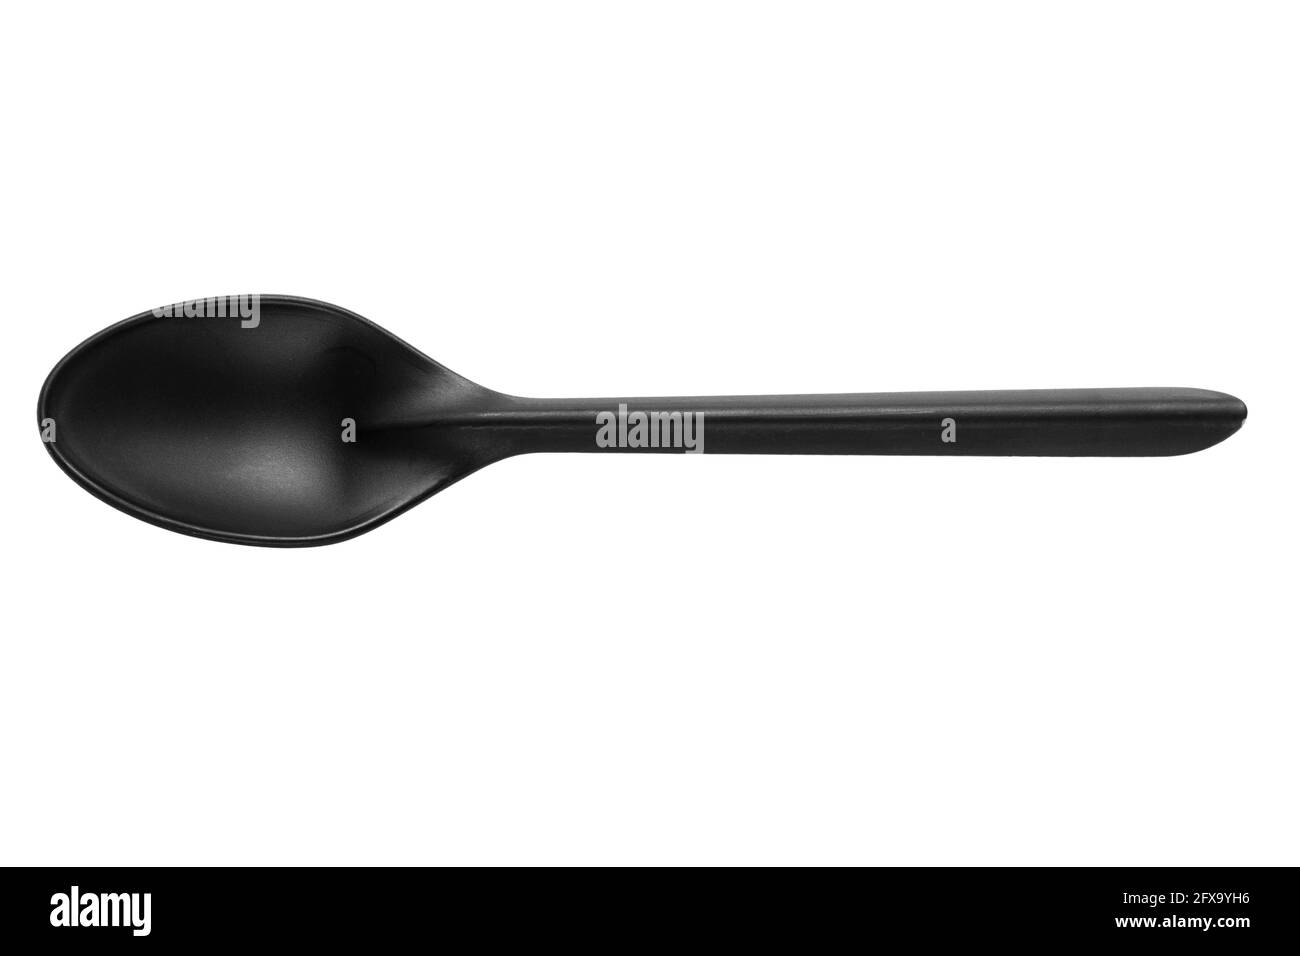 Black plastic spoon isolated on white background. Disposable tableware set isolated with clipping path. Stock Photo